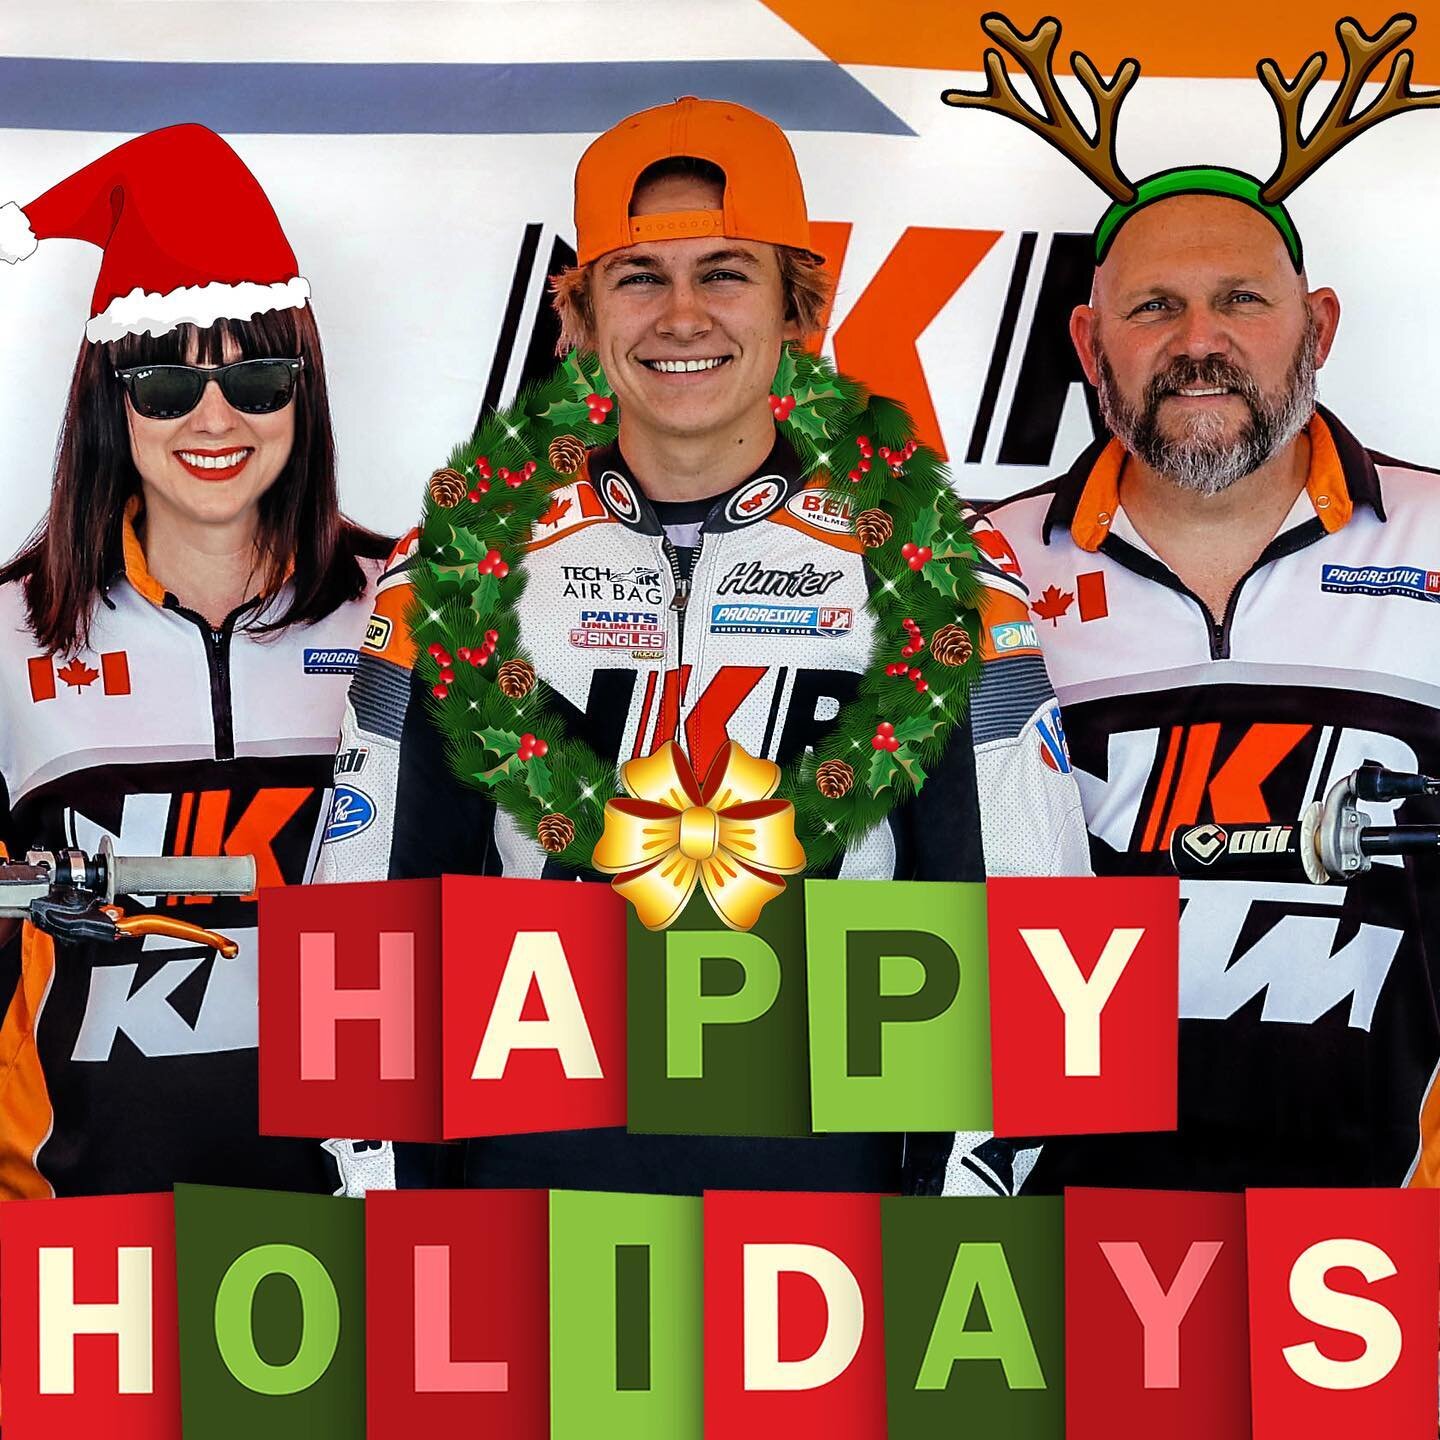 HAPPY HOLIDAYS EVERYONE! Big🥂 to all our fans, supporters and our flat track family. We wish you all the best over the holiday season.
❤️The NKR KTM posse🎄☃️ 

@ktmusa @ktm_canada  @vanceandhines @hinsonracing @wp_suspension_usa @twentysix_suspensi